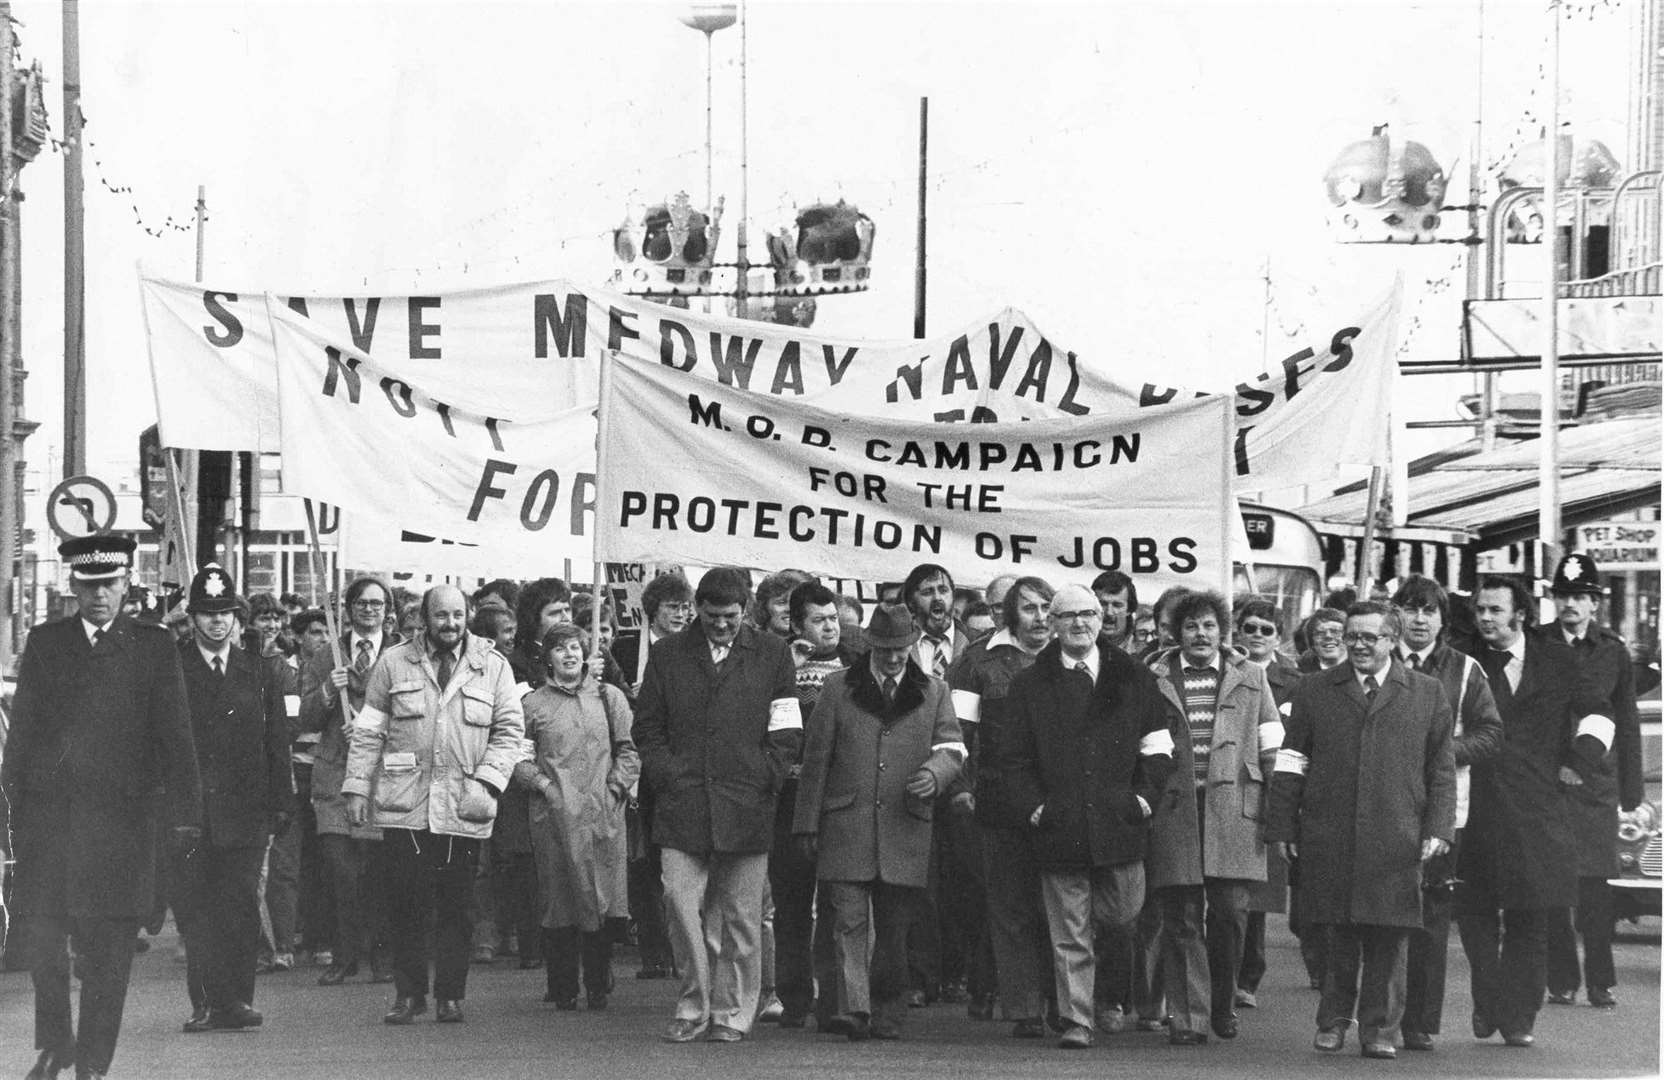 Dockyard workers took their protests to the TUC conference in 1981.